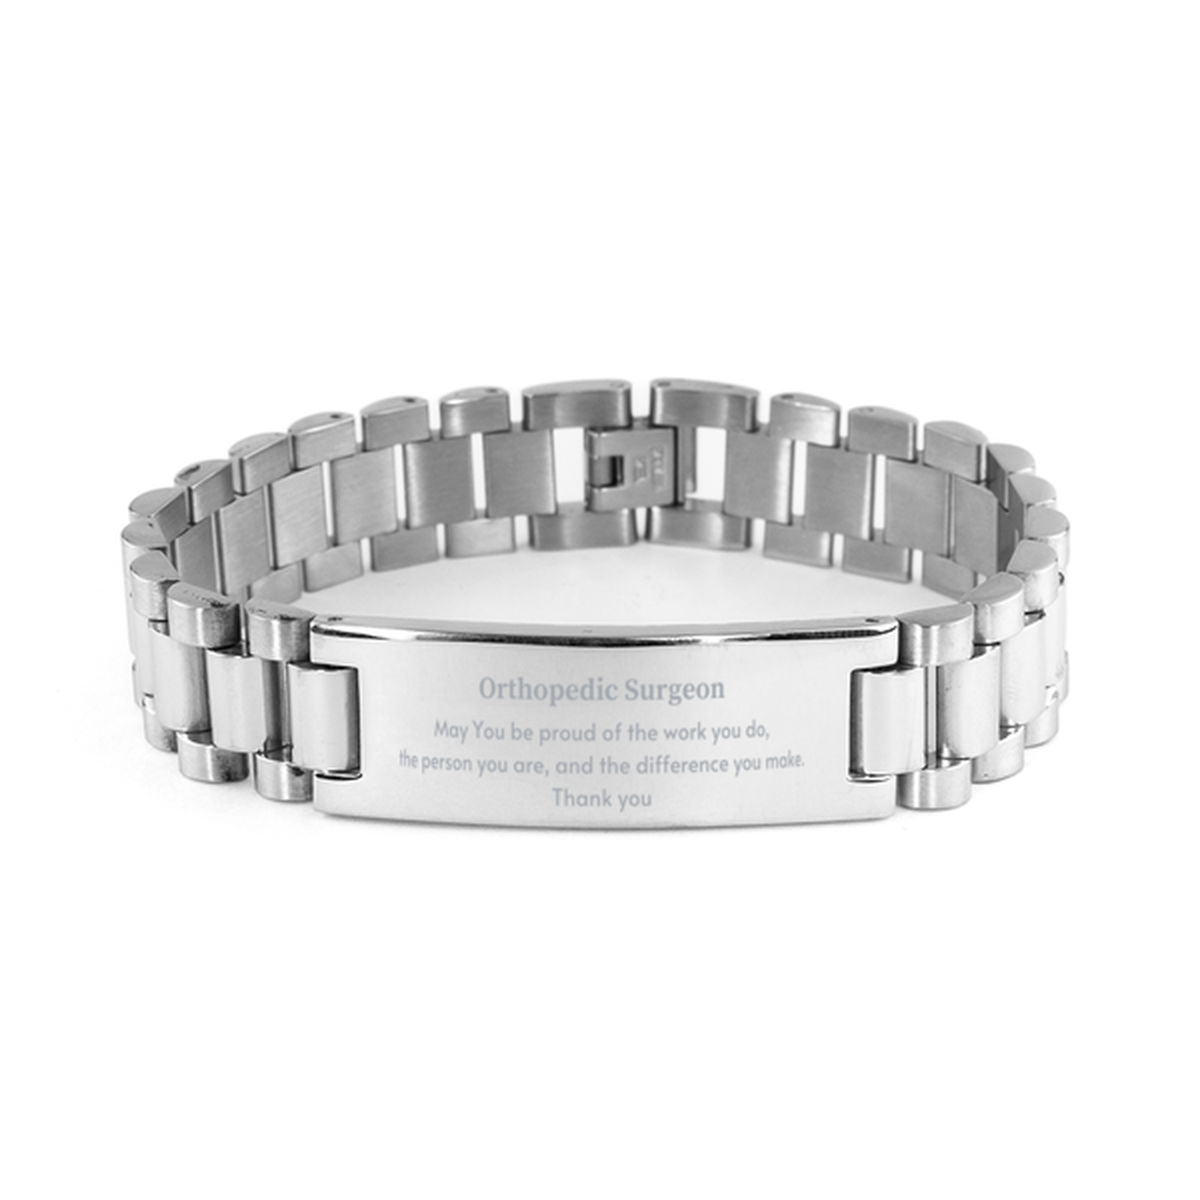 Heartwarming Ladder Stainless Steel Bracelet Retirement Coworkers Gifts for Orthopedic Surgeon, Orthopedic Surgeon May You be proud of the work you do, the person you are Gifts for Boss Men Women Friends